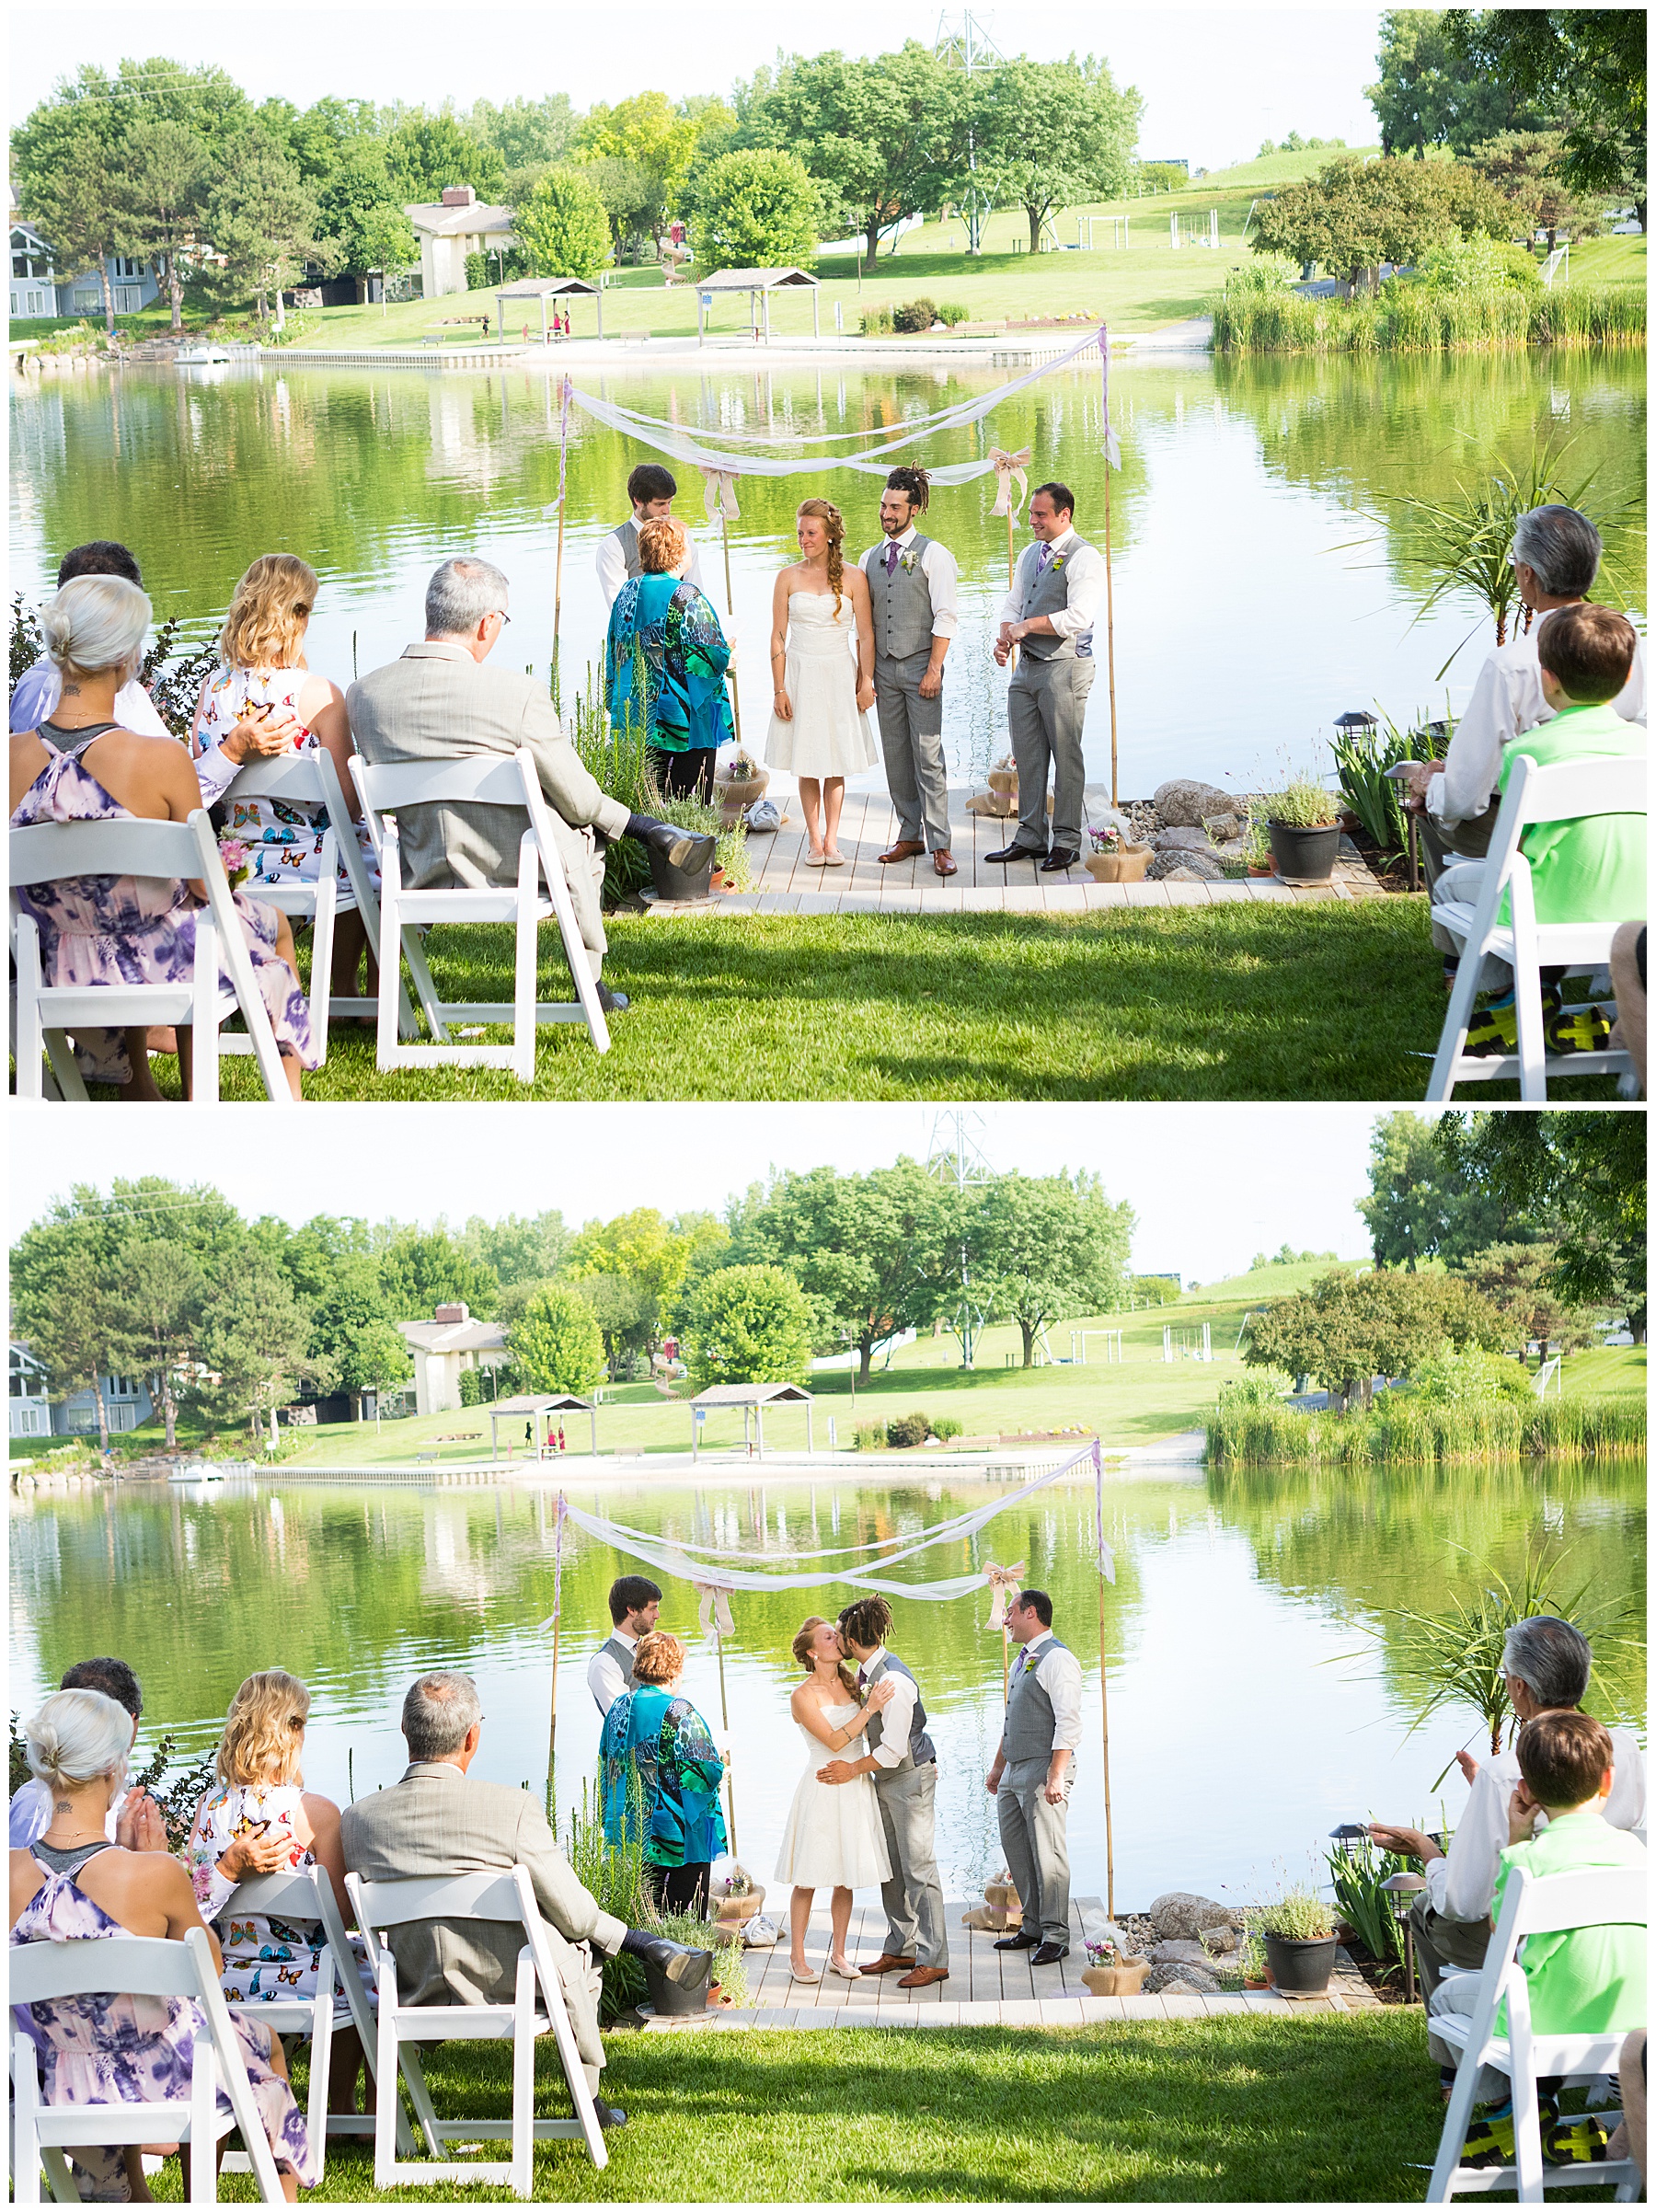 Backyard wedding in Omaha,Andrea Bibeault: a wedding photojournalist specializes in real,photojournalistic wedding photography. Based in Omaha,we travel all over the midwest and country.,